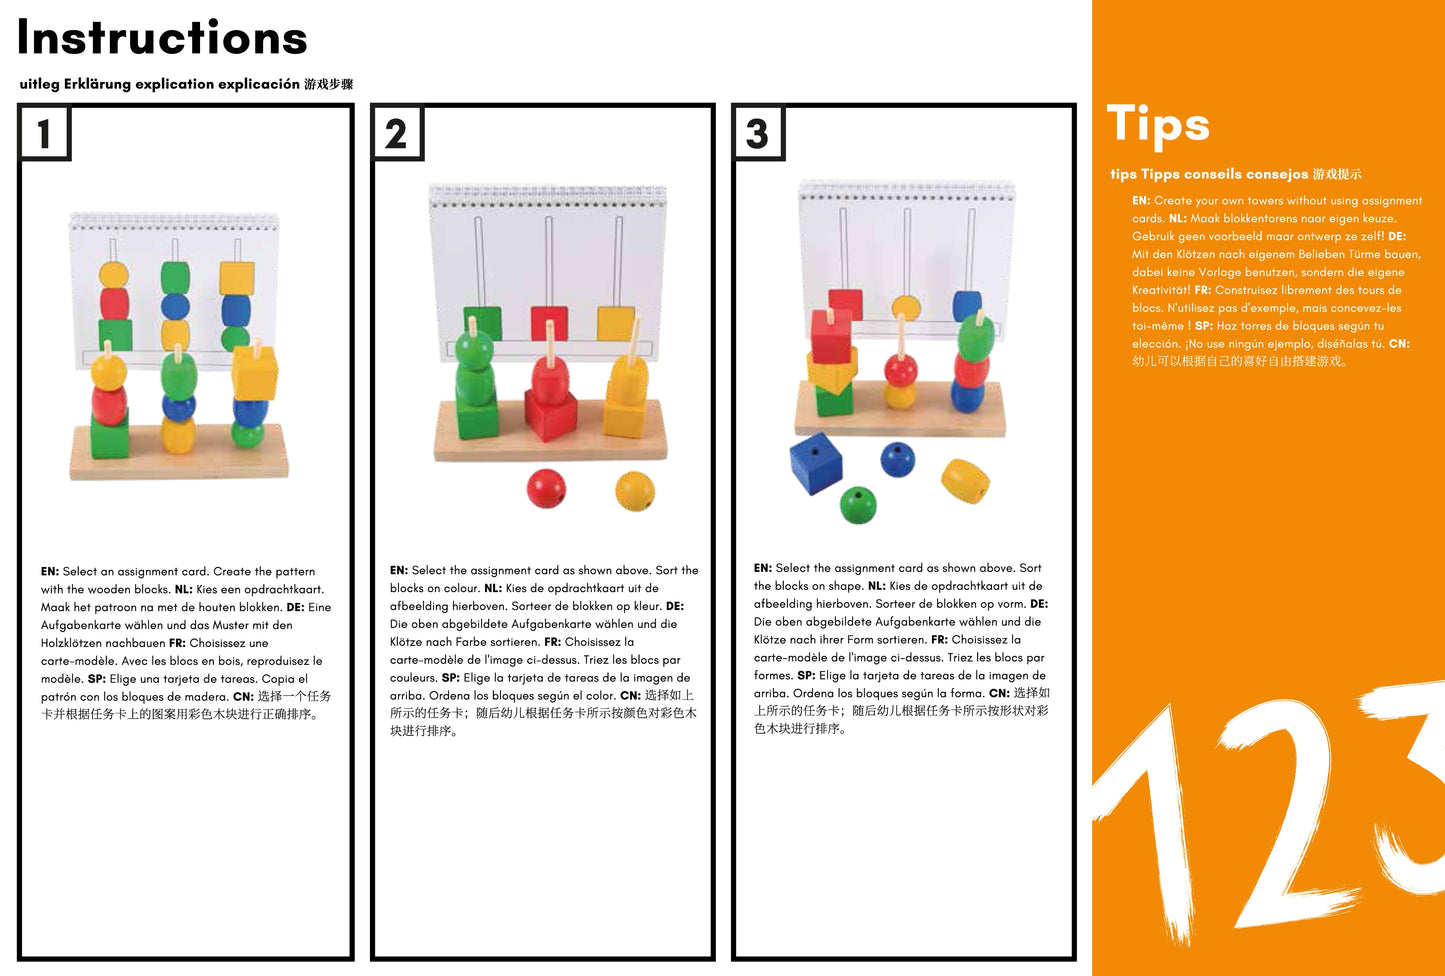 Coloured Shapes on 3 Dowels with Workcards: Build the tower